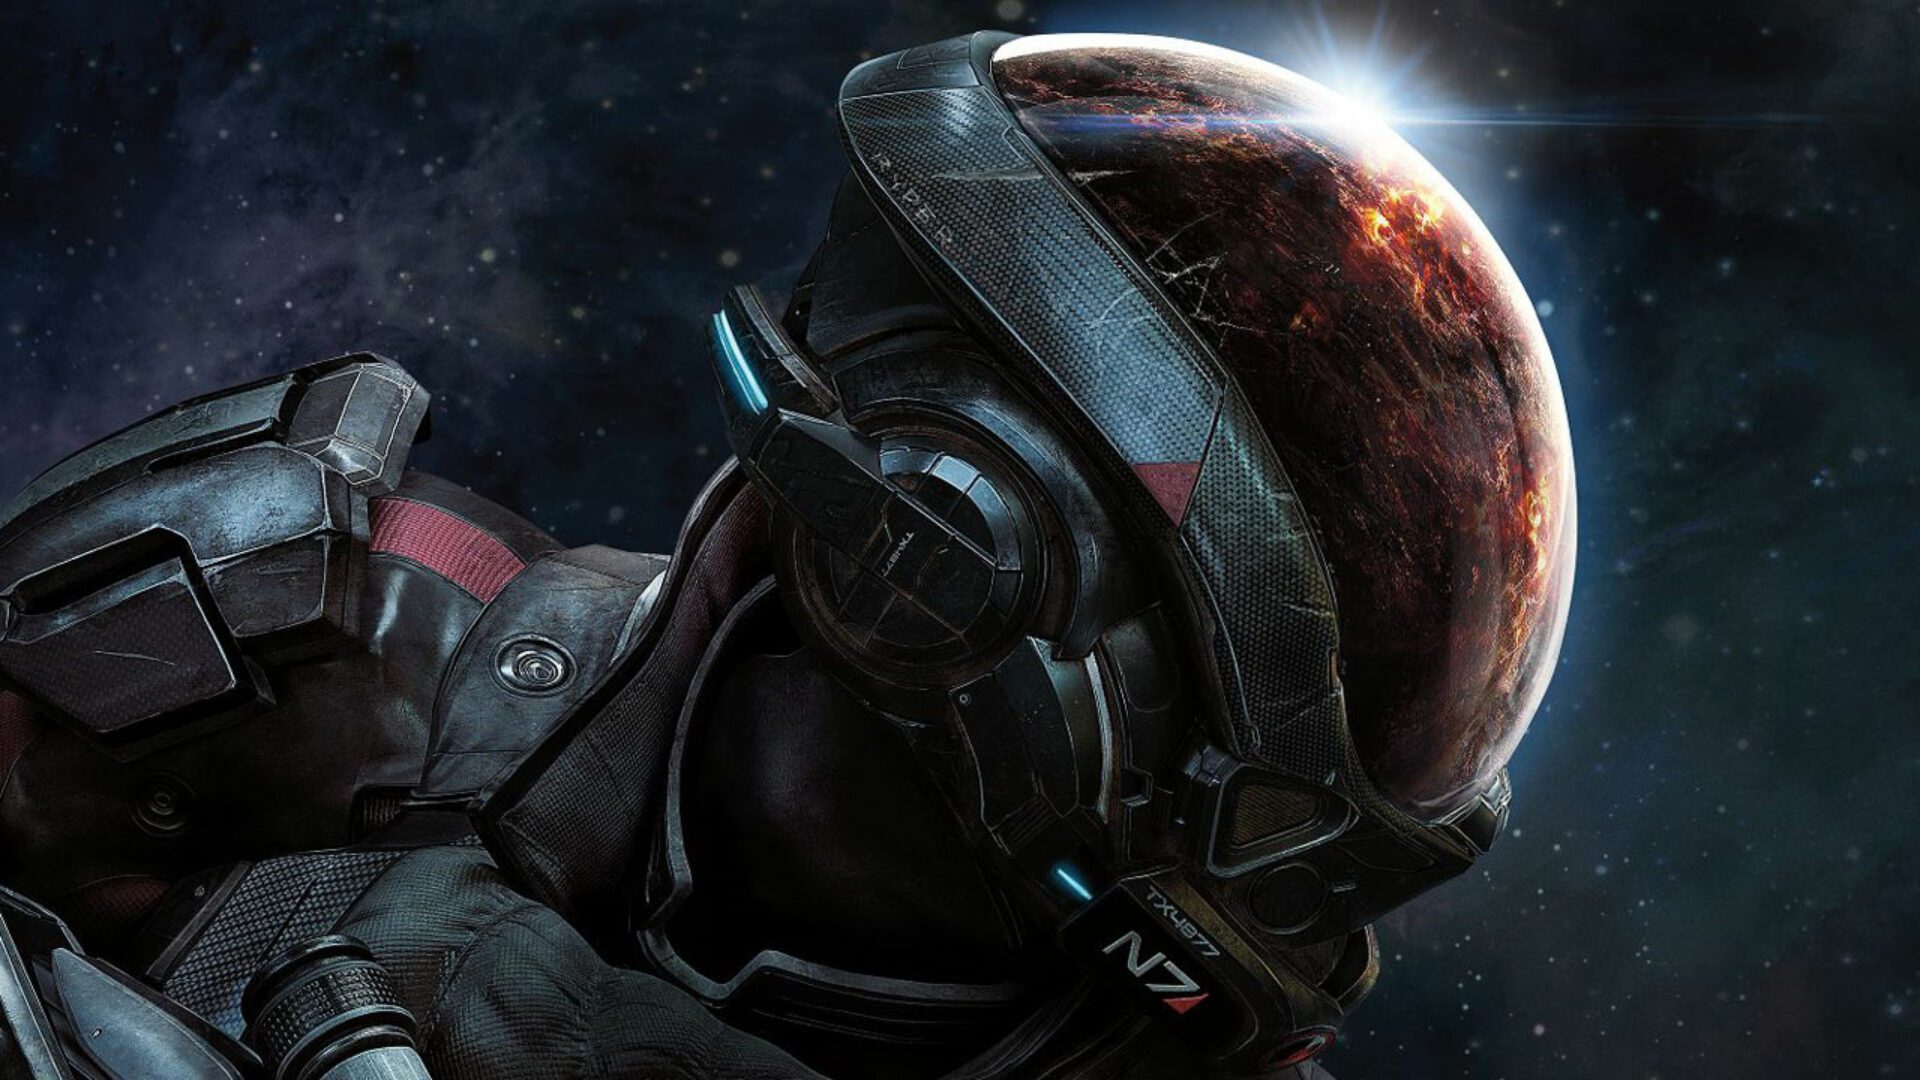 BioWare Explains Future Changes for Mass Effect Andromeda